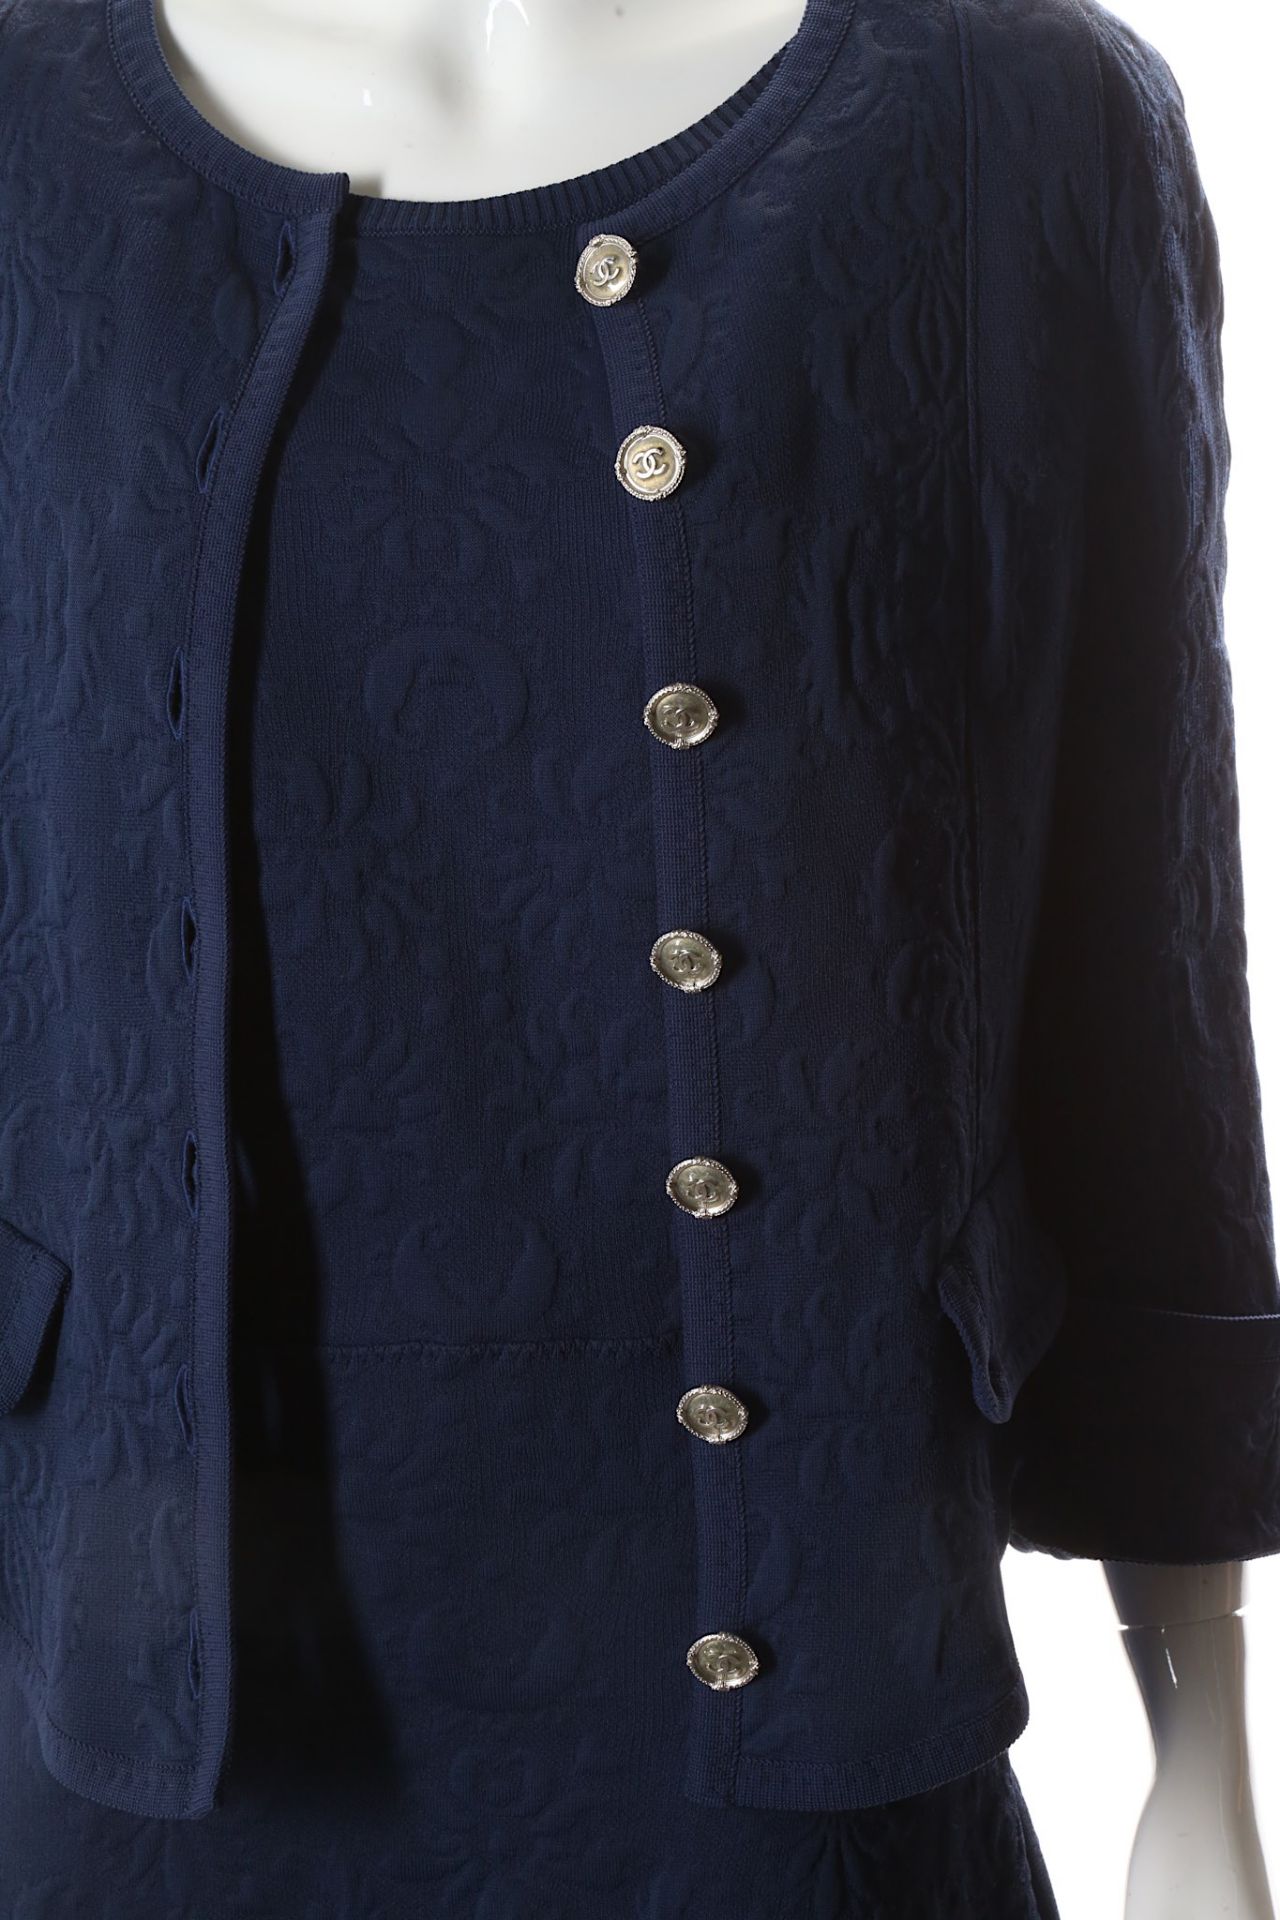 Chanel Navy Blue Jacket and Dress, 2010s, raised b - Image 2 of 7